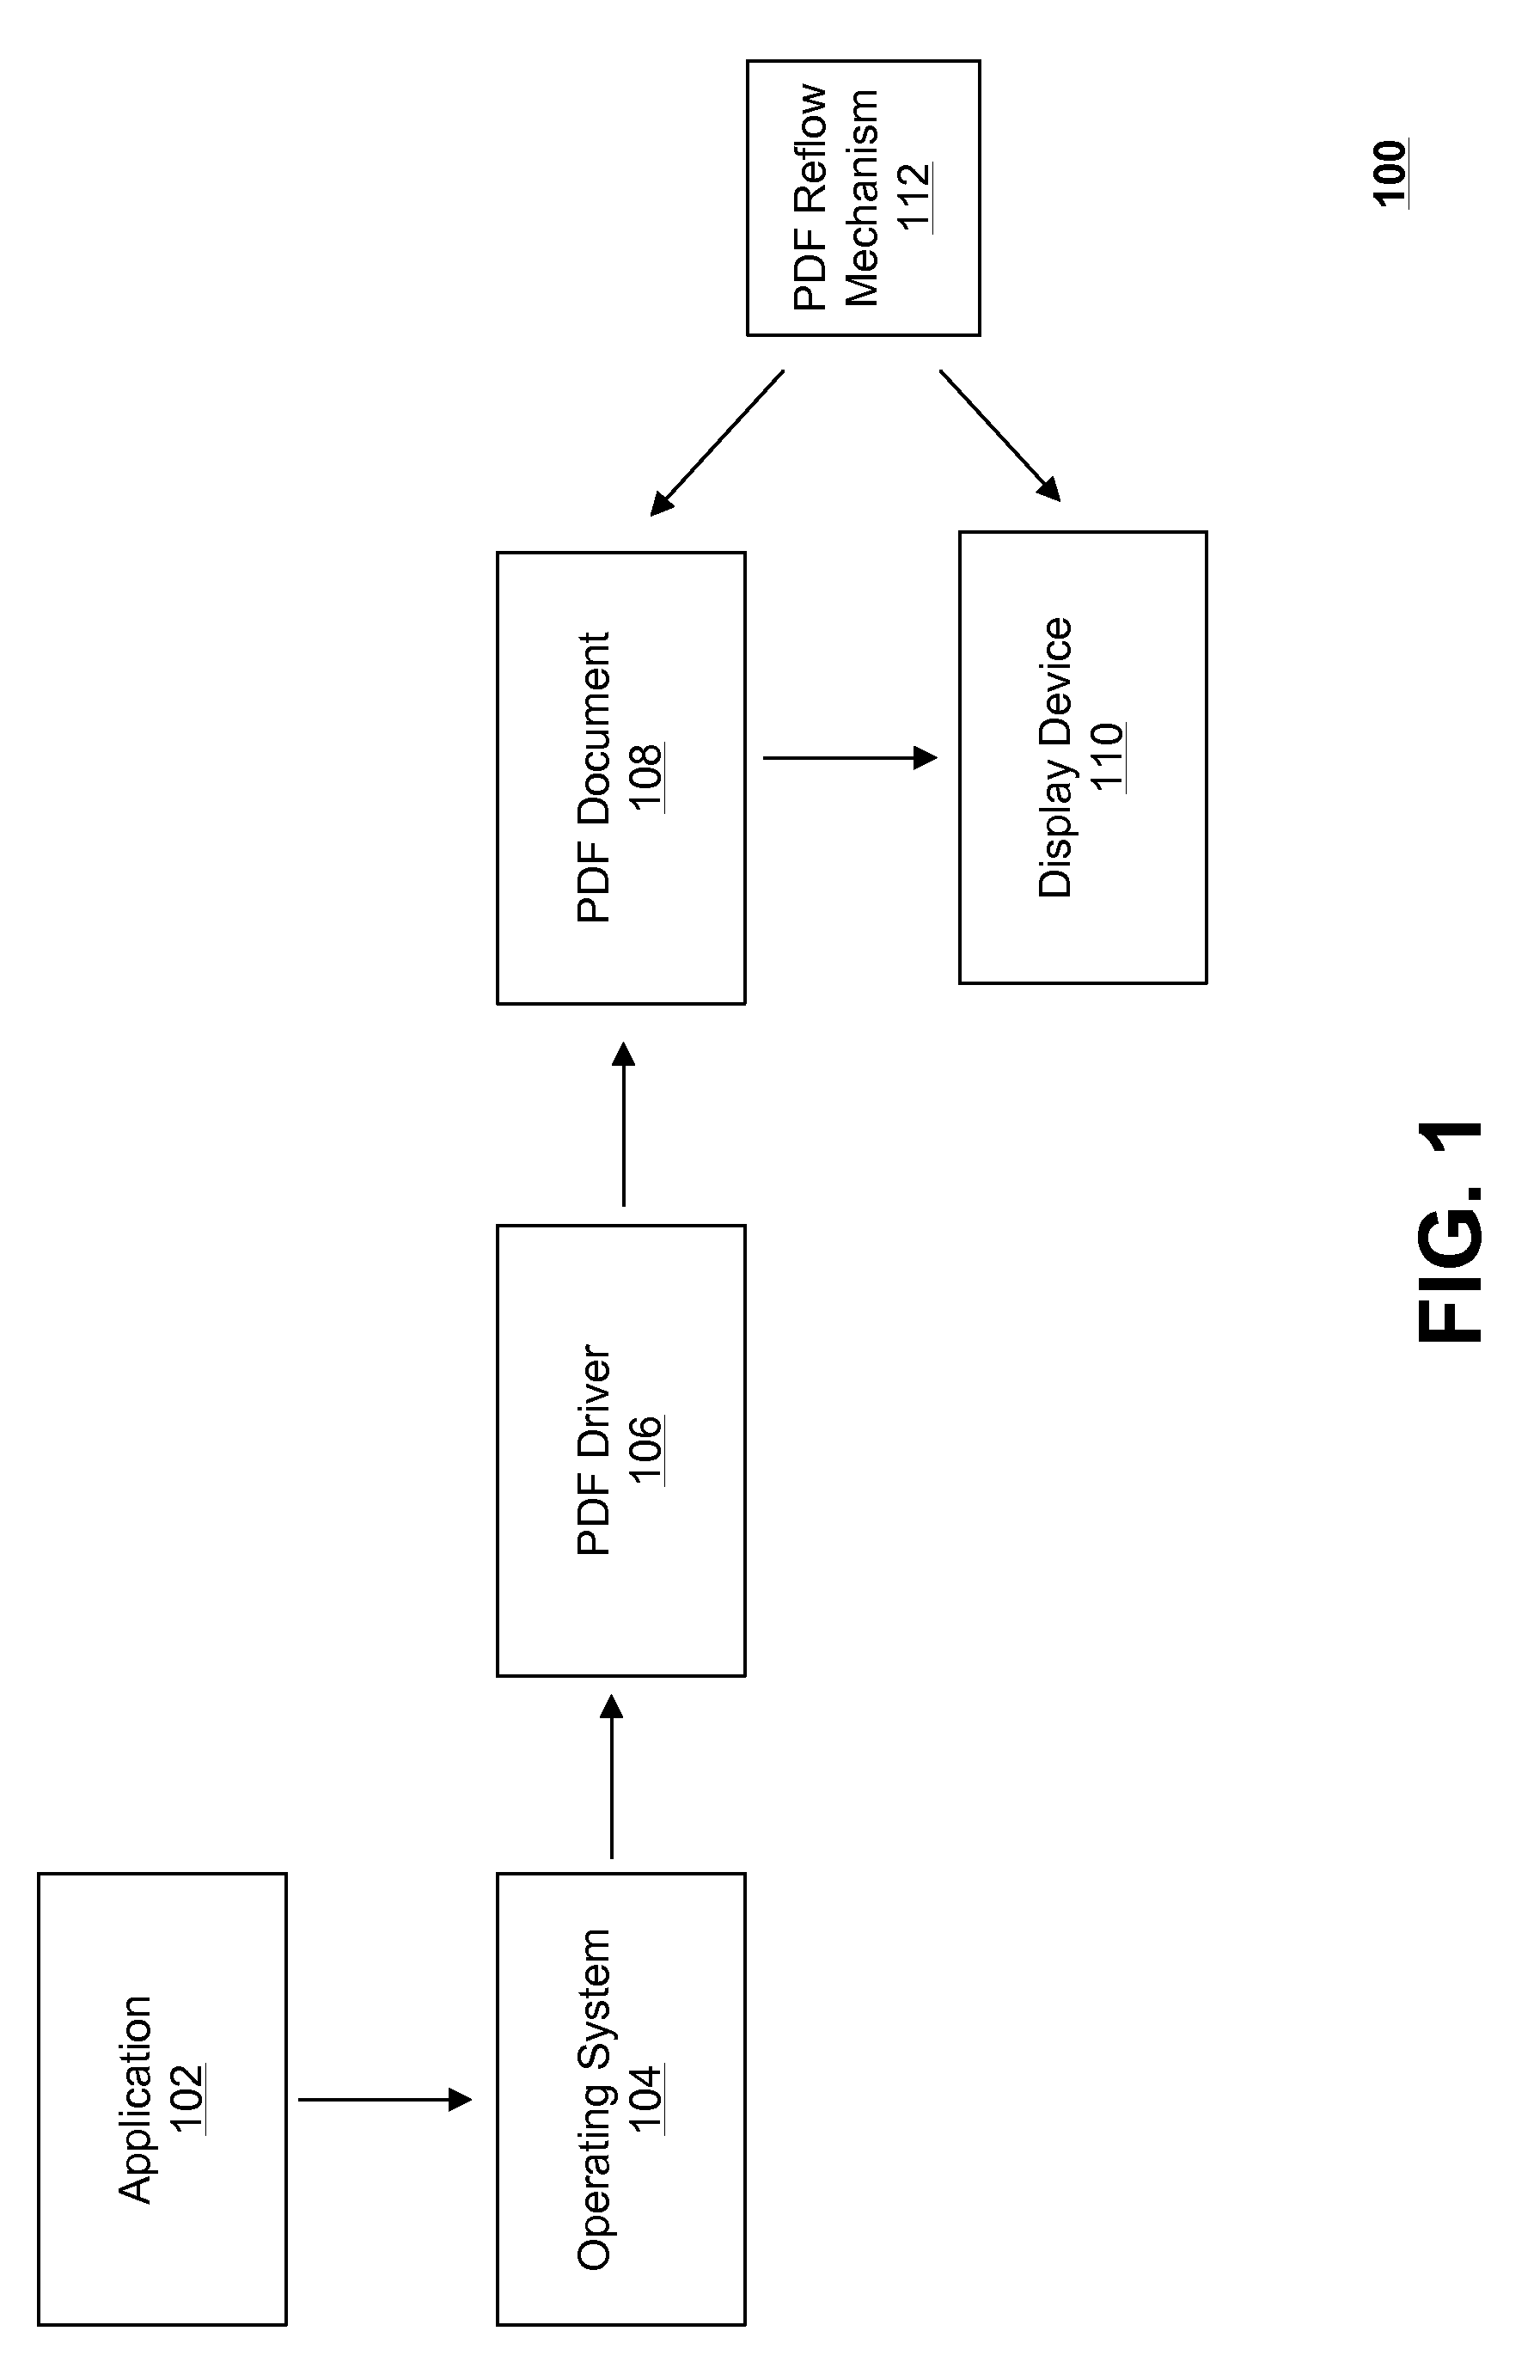 System and method for reflowing content in a structured portable document format (PDF) file